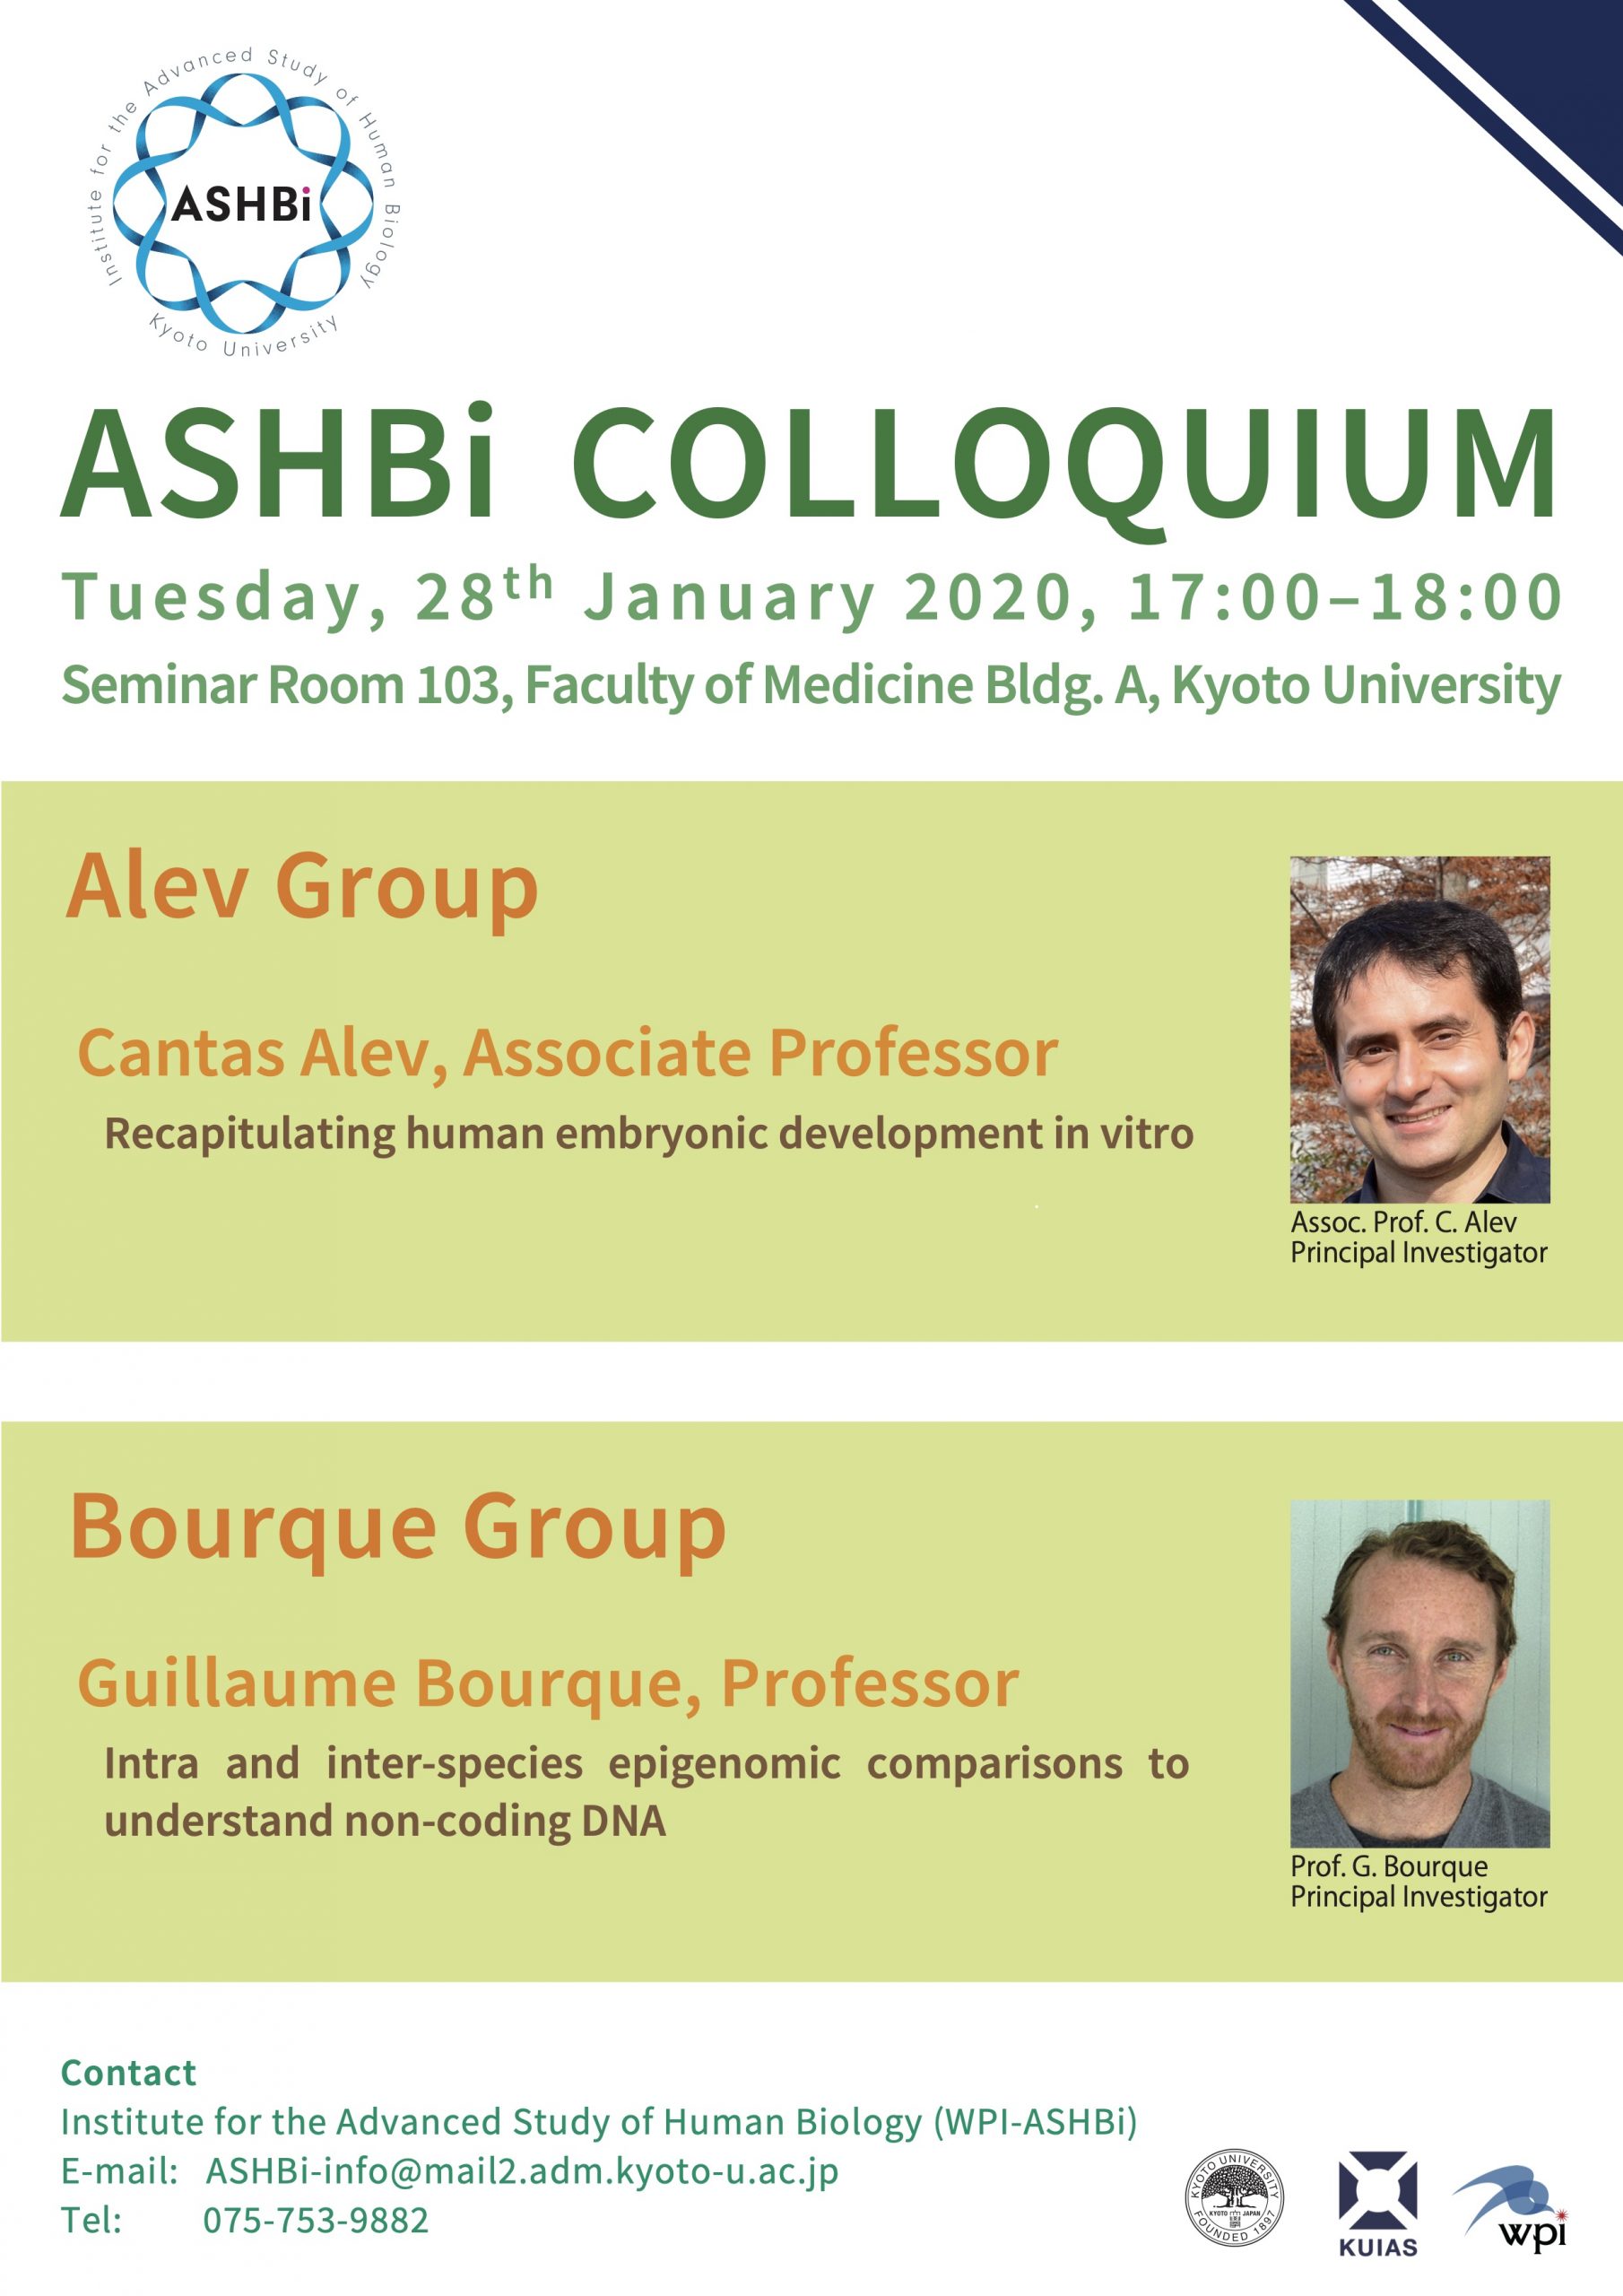 6th ASHBi Colloquium (Alev Group and Bourque Group)